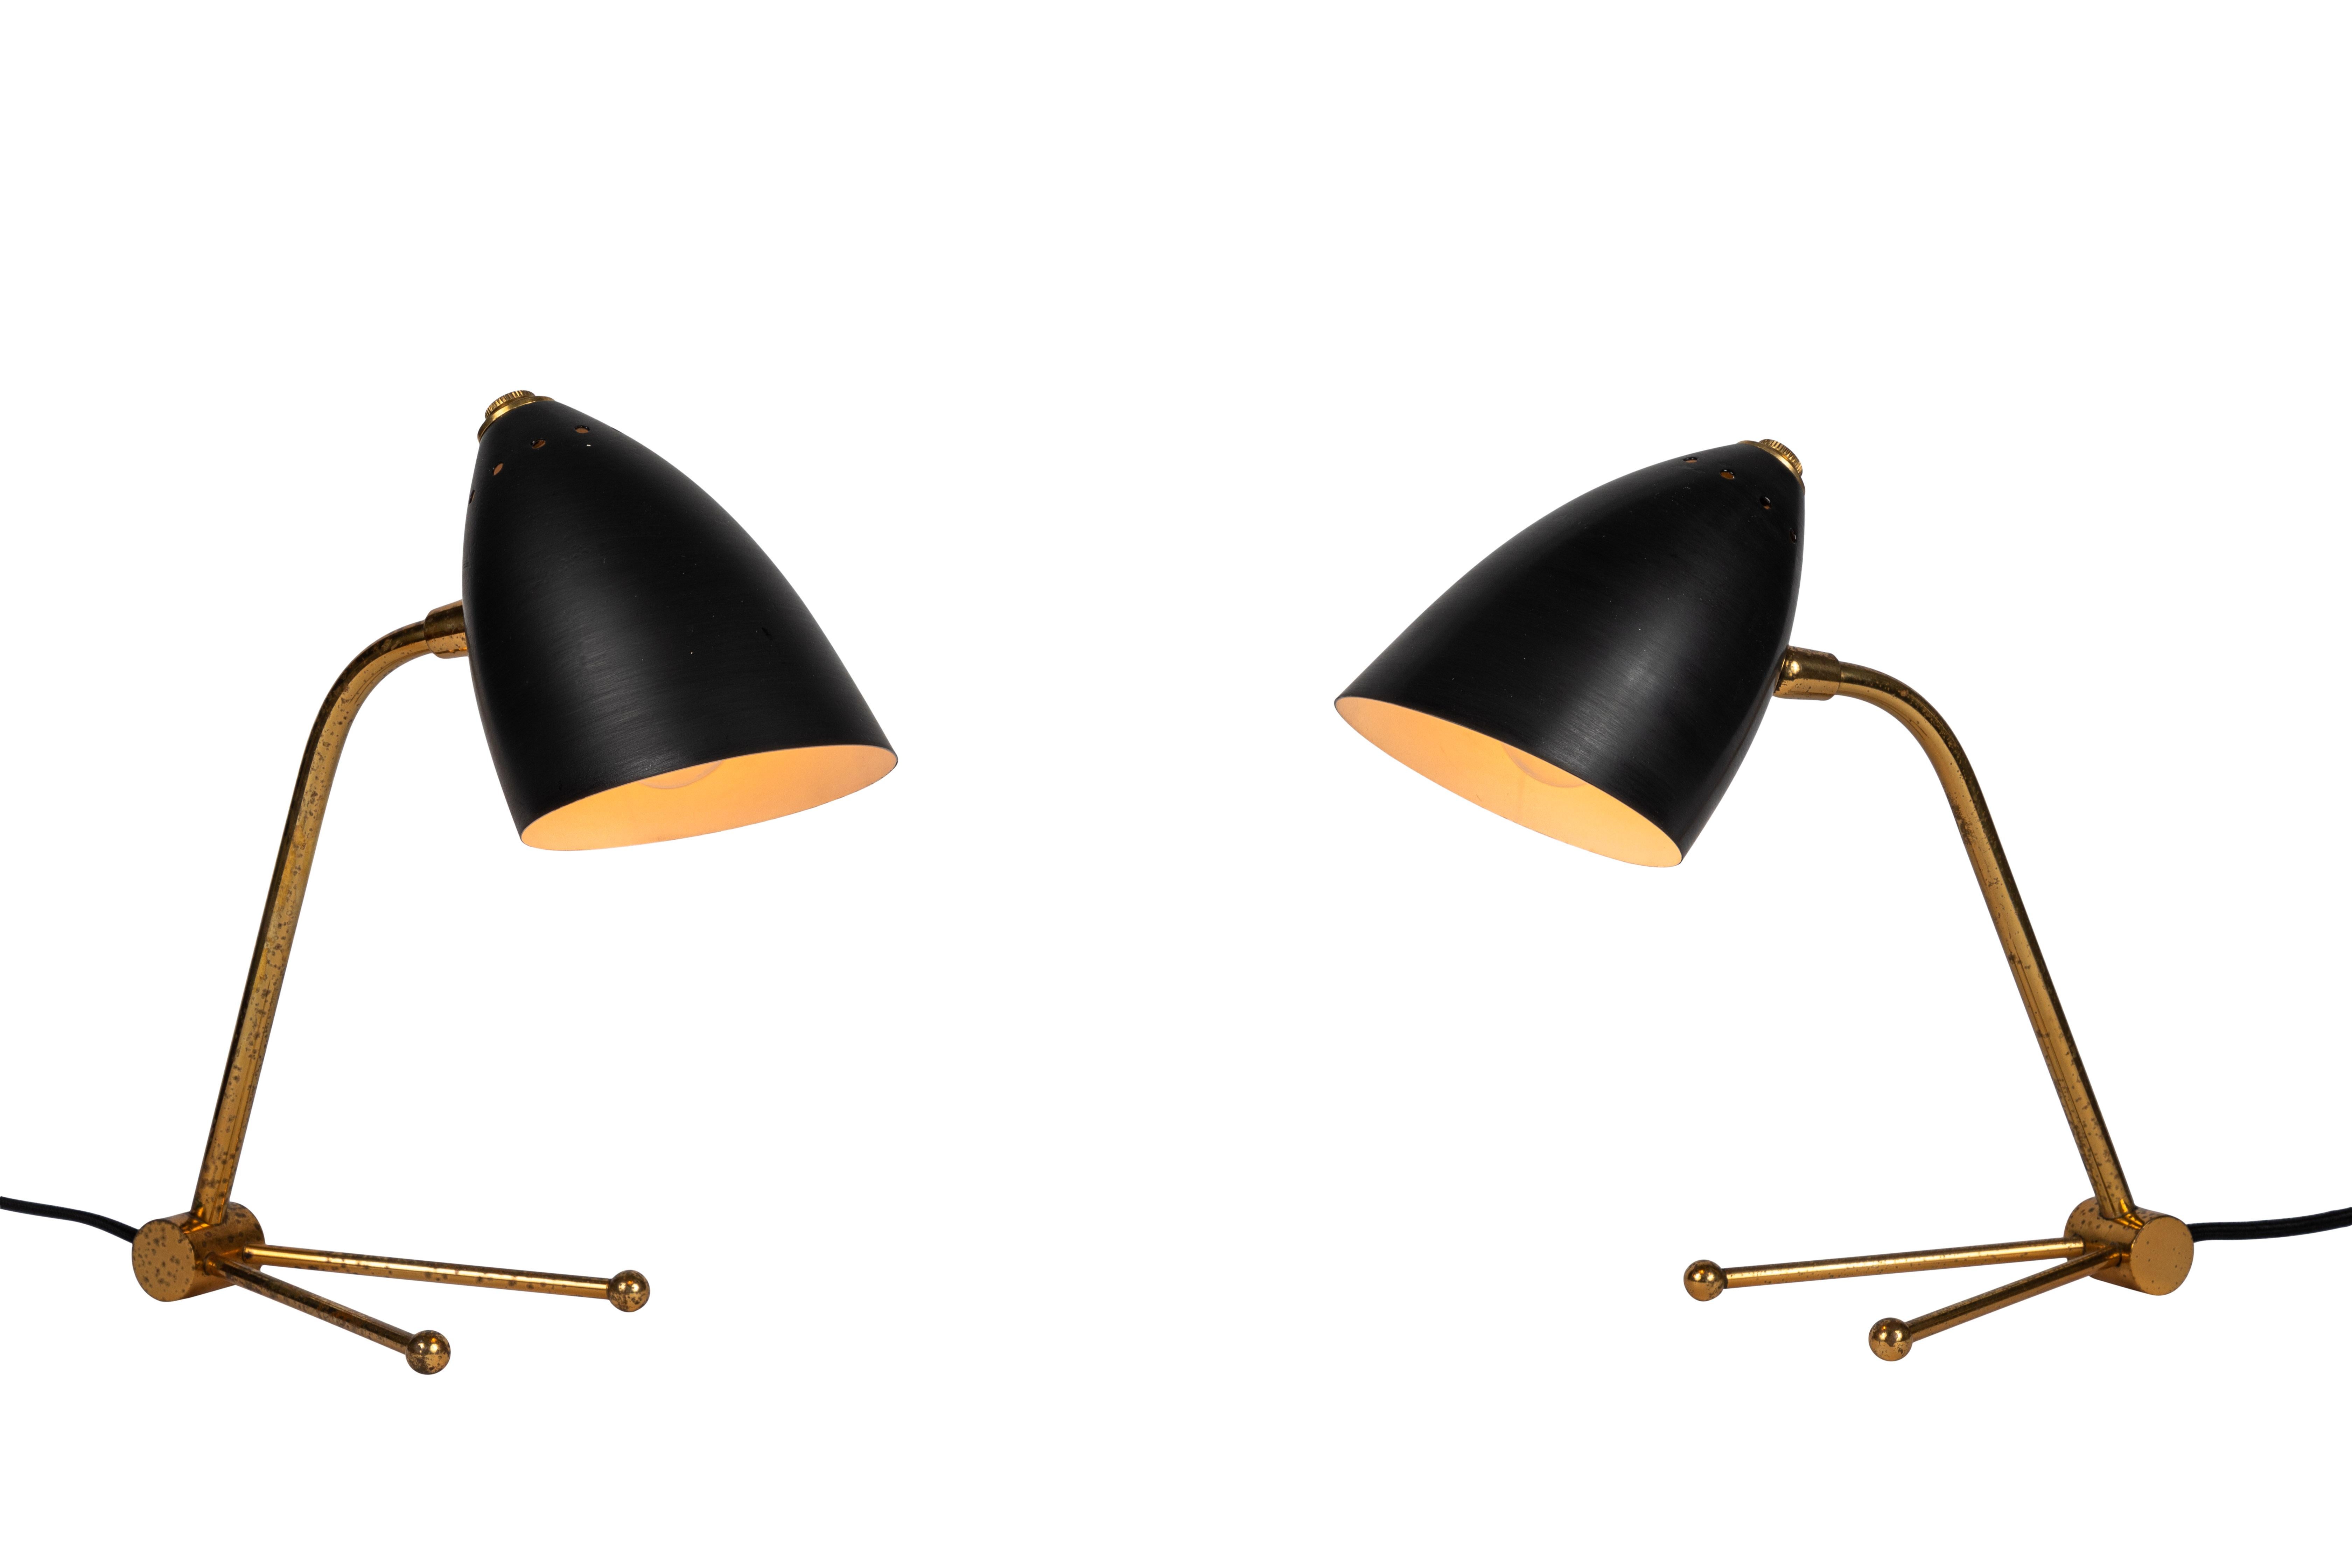 Pair of 1950s Finnish table lamps attributed to Mauri Almari. Executed in black painted metal and patinated brass. Shades rotate up and down and side to side. An incredibly refined design that is quintessentially Finnish.

A contemporary of Paavo